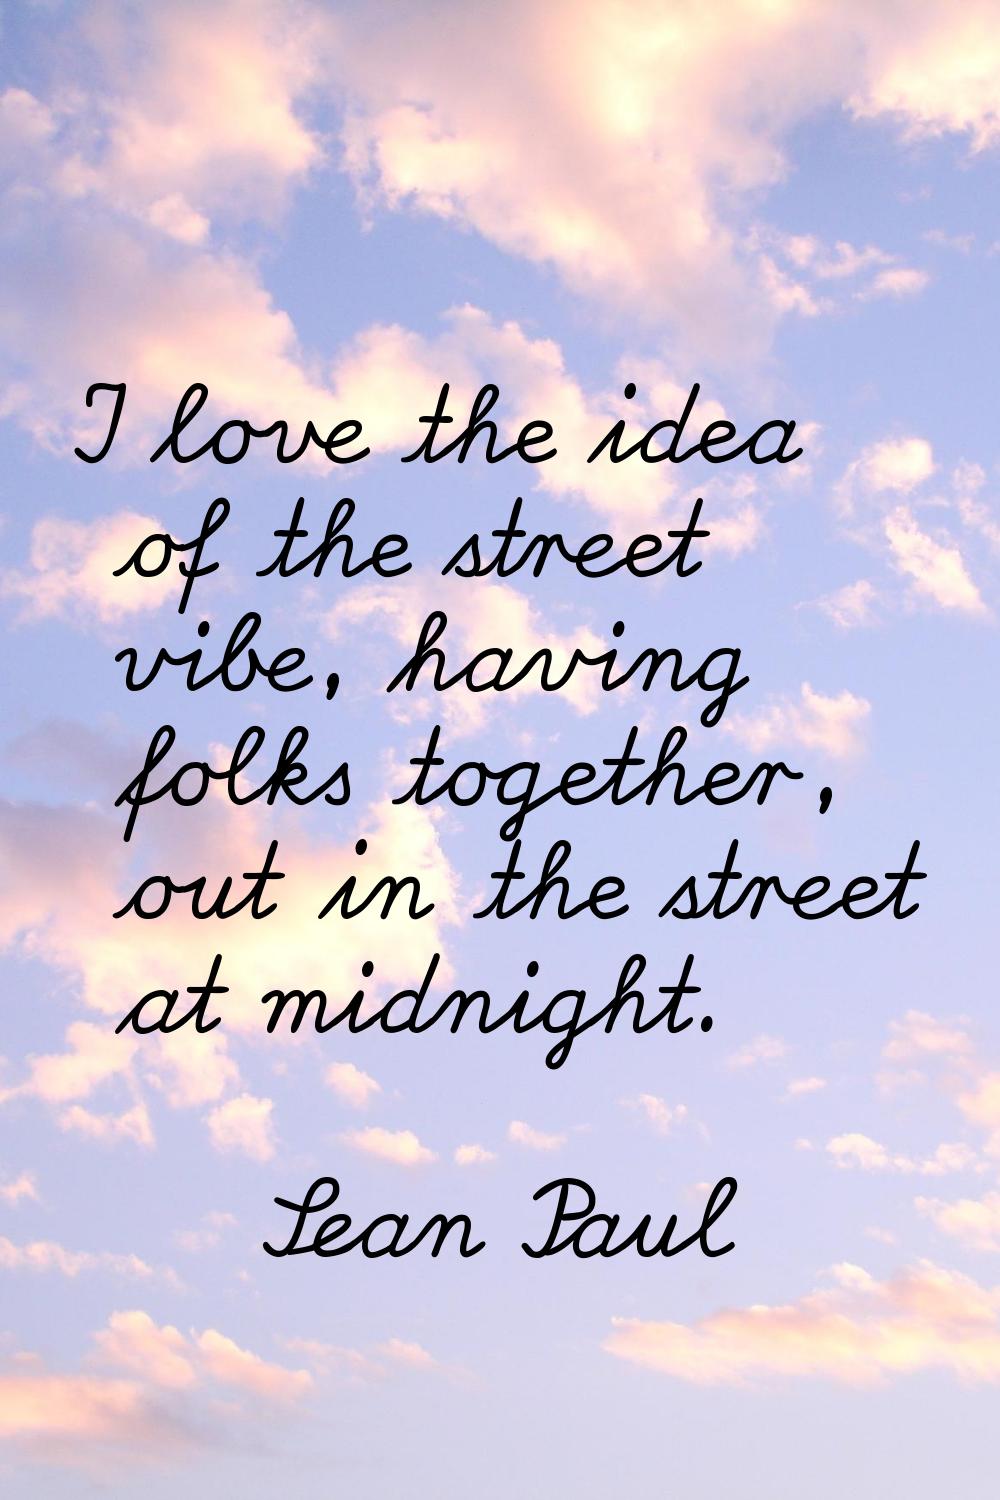 I love the idea of the street vibe, having folks together, out in the street at midnight.